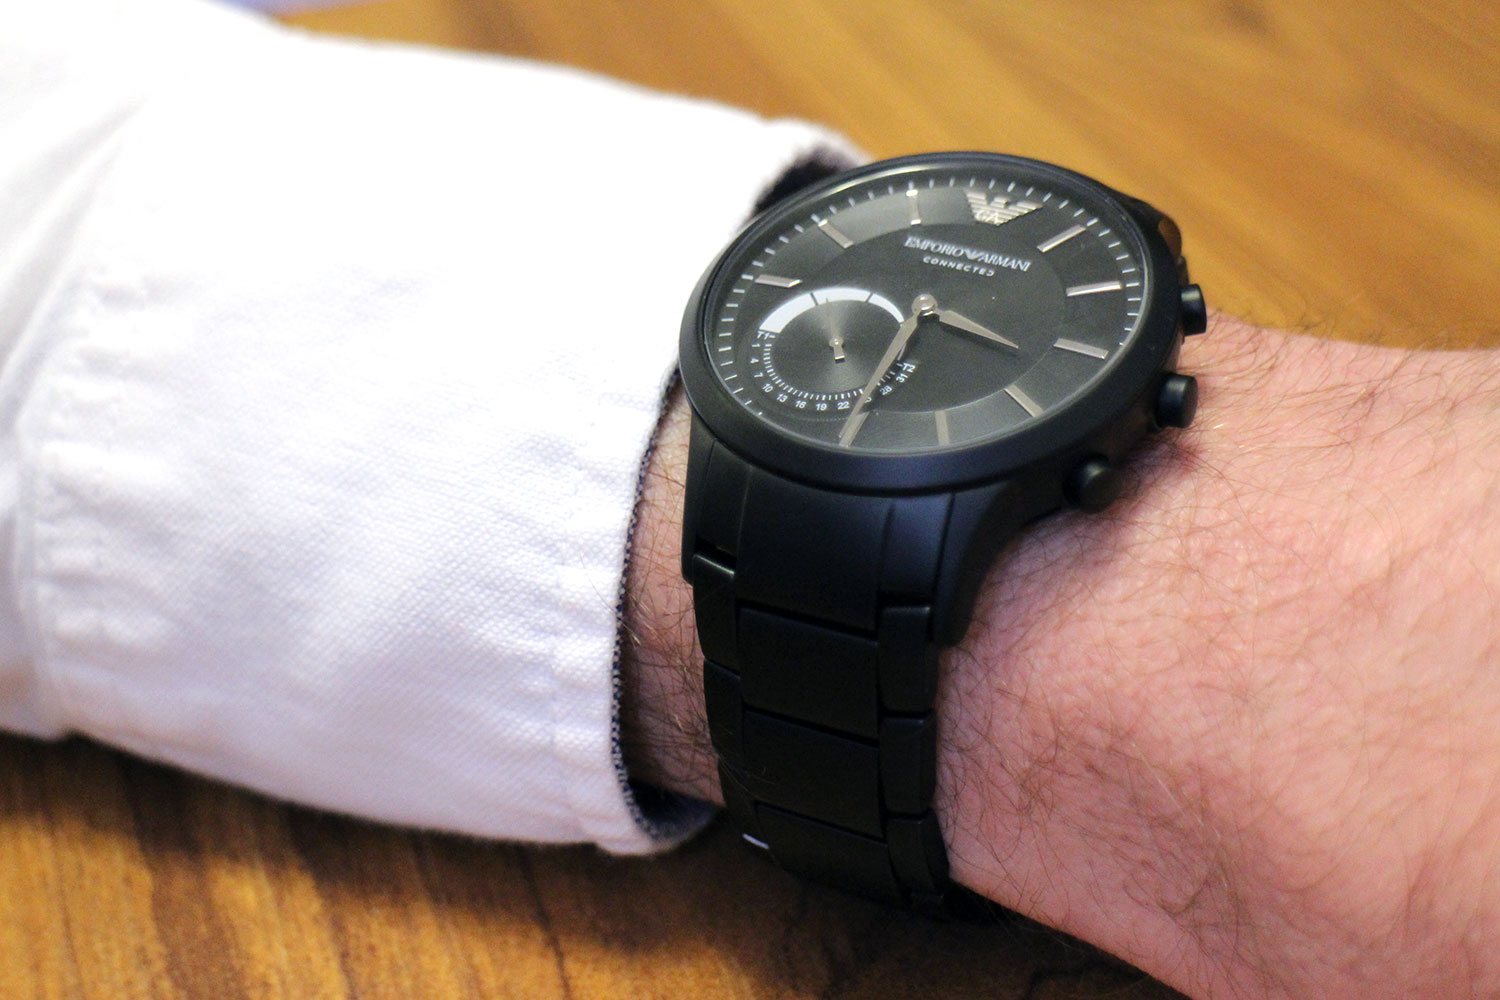 Emporio Armani EA Connected Watch: Review, Features, Price | Digital Trends